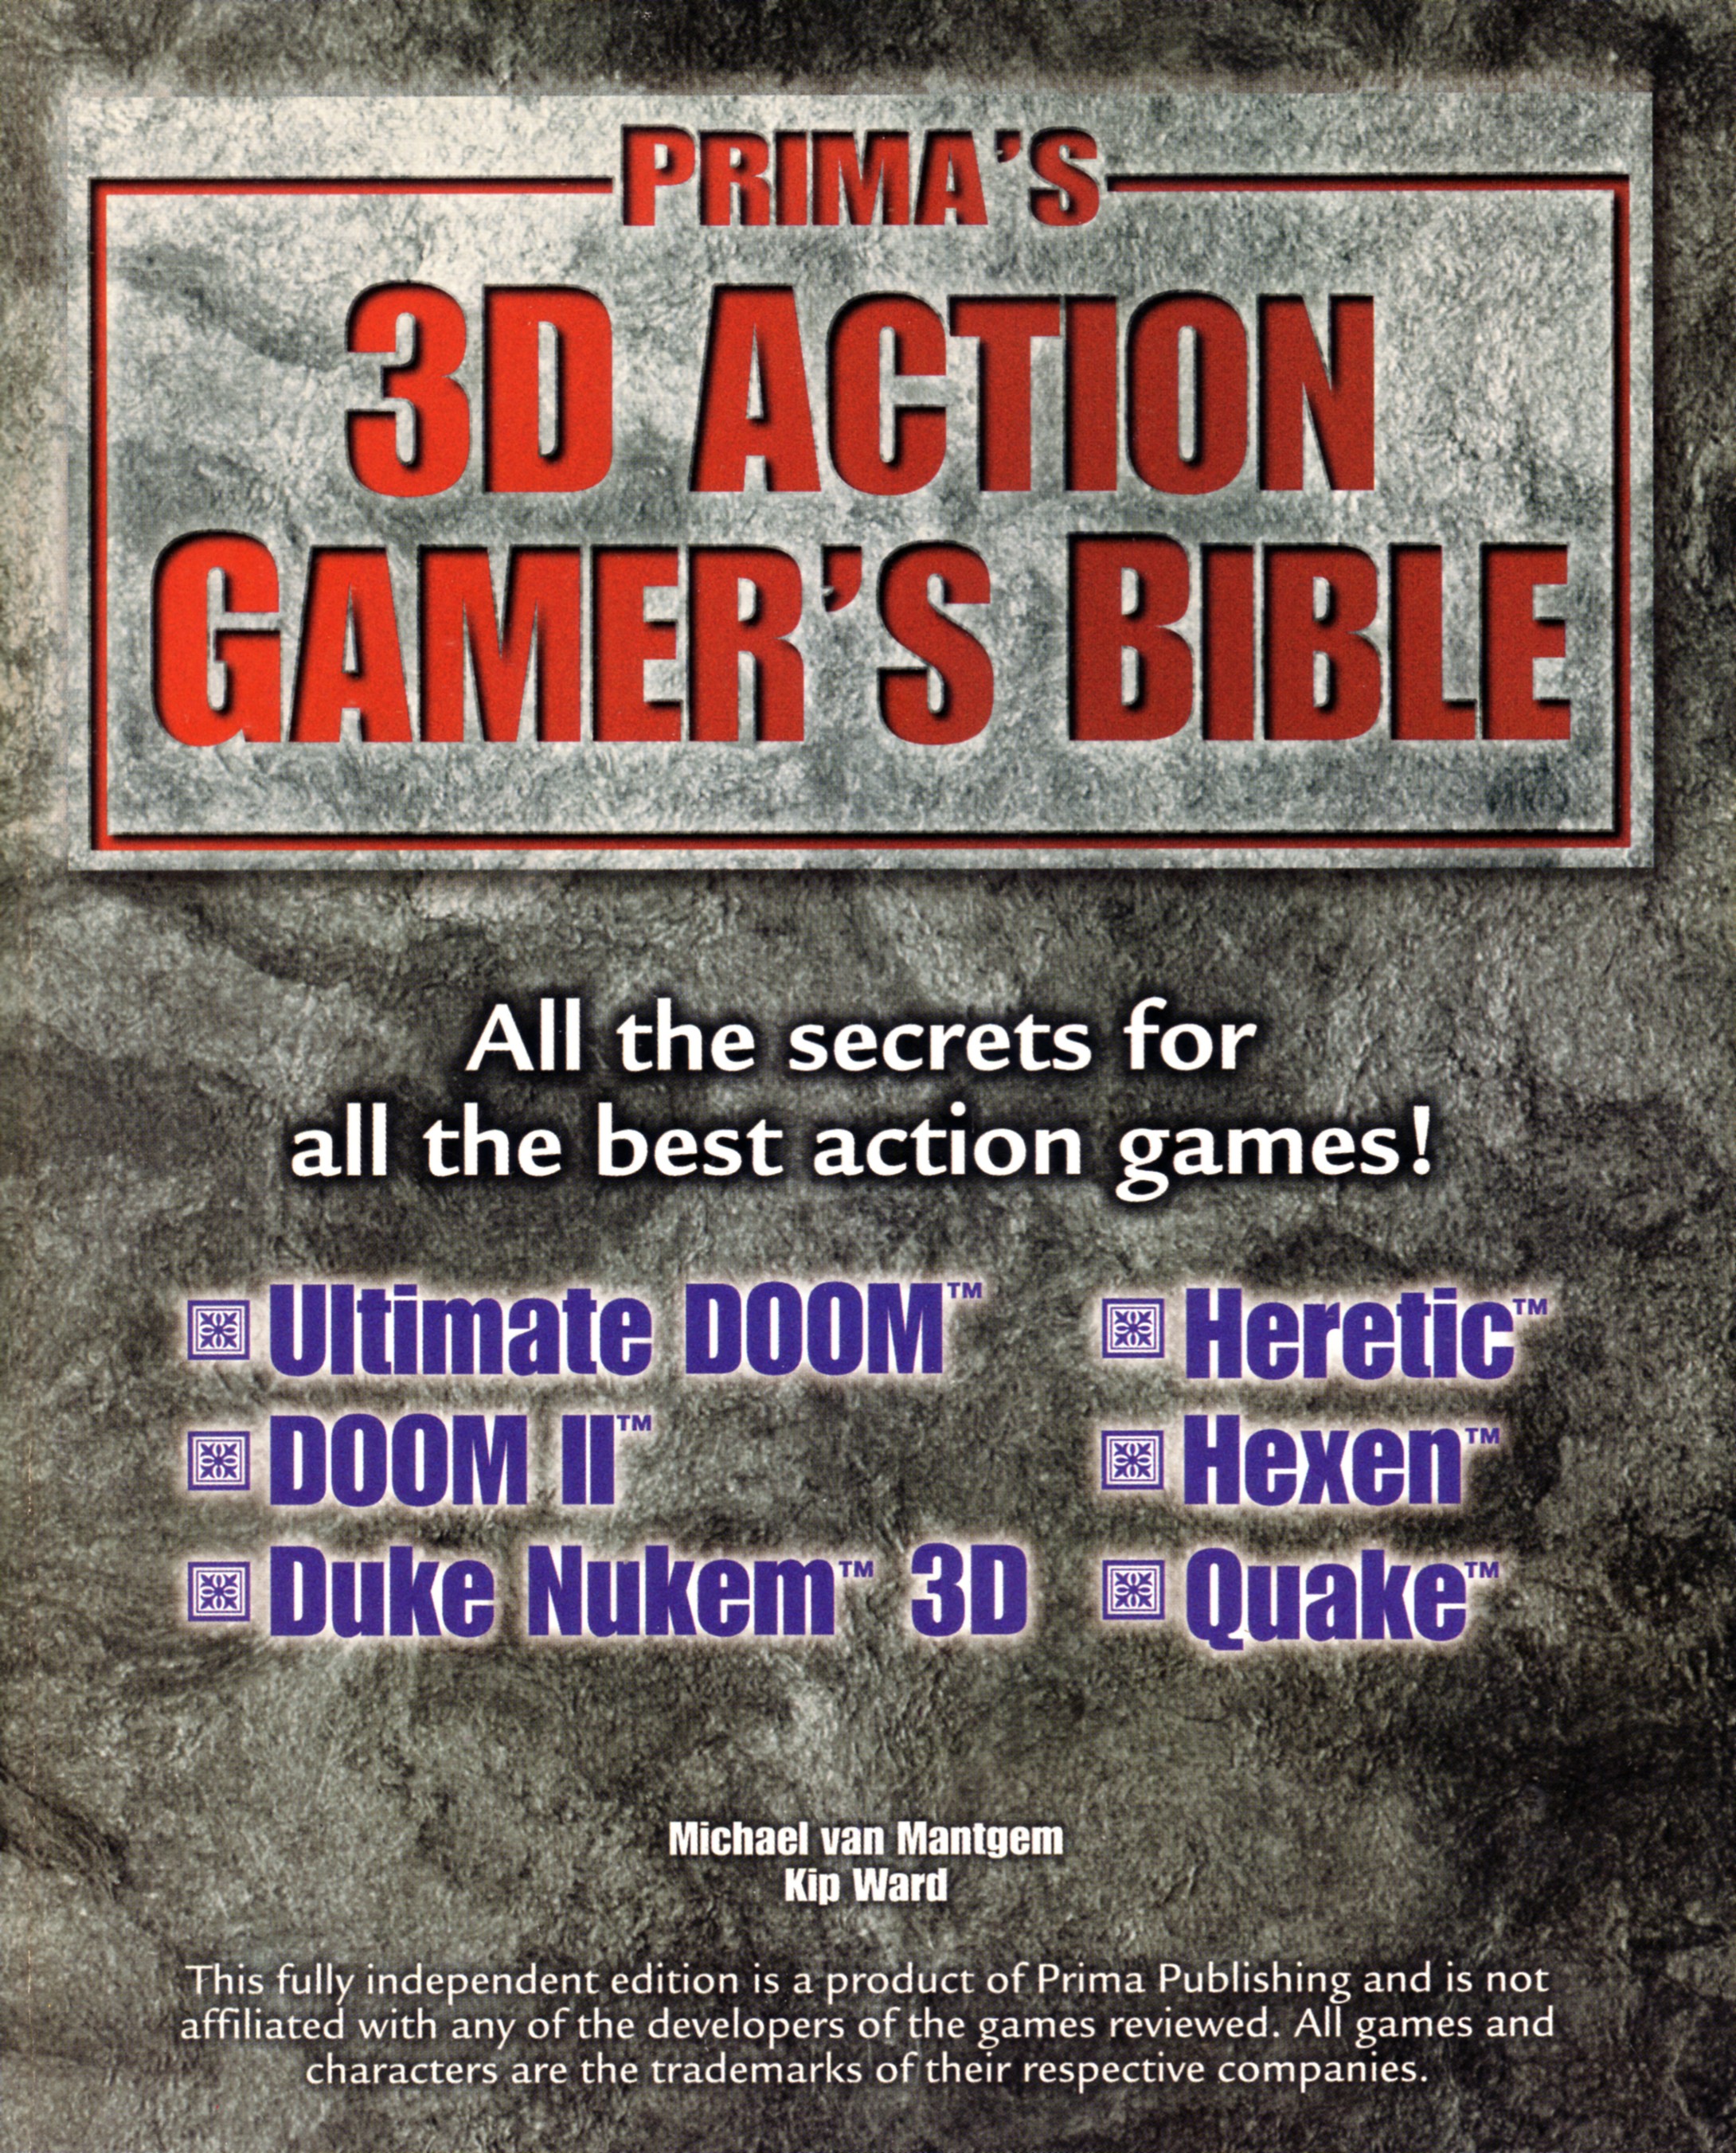 More information about "3D Action Gamer's Bible"